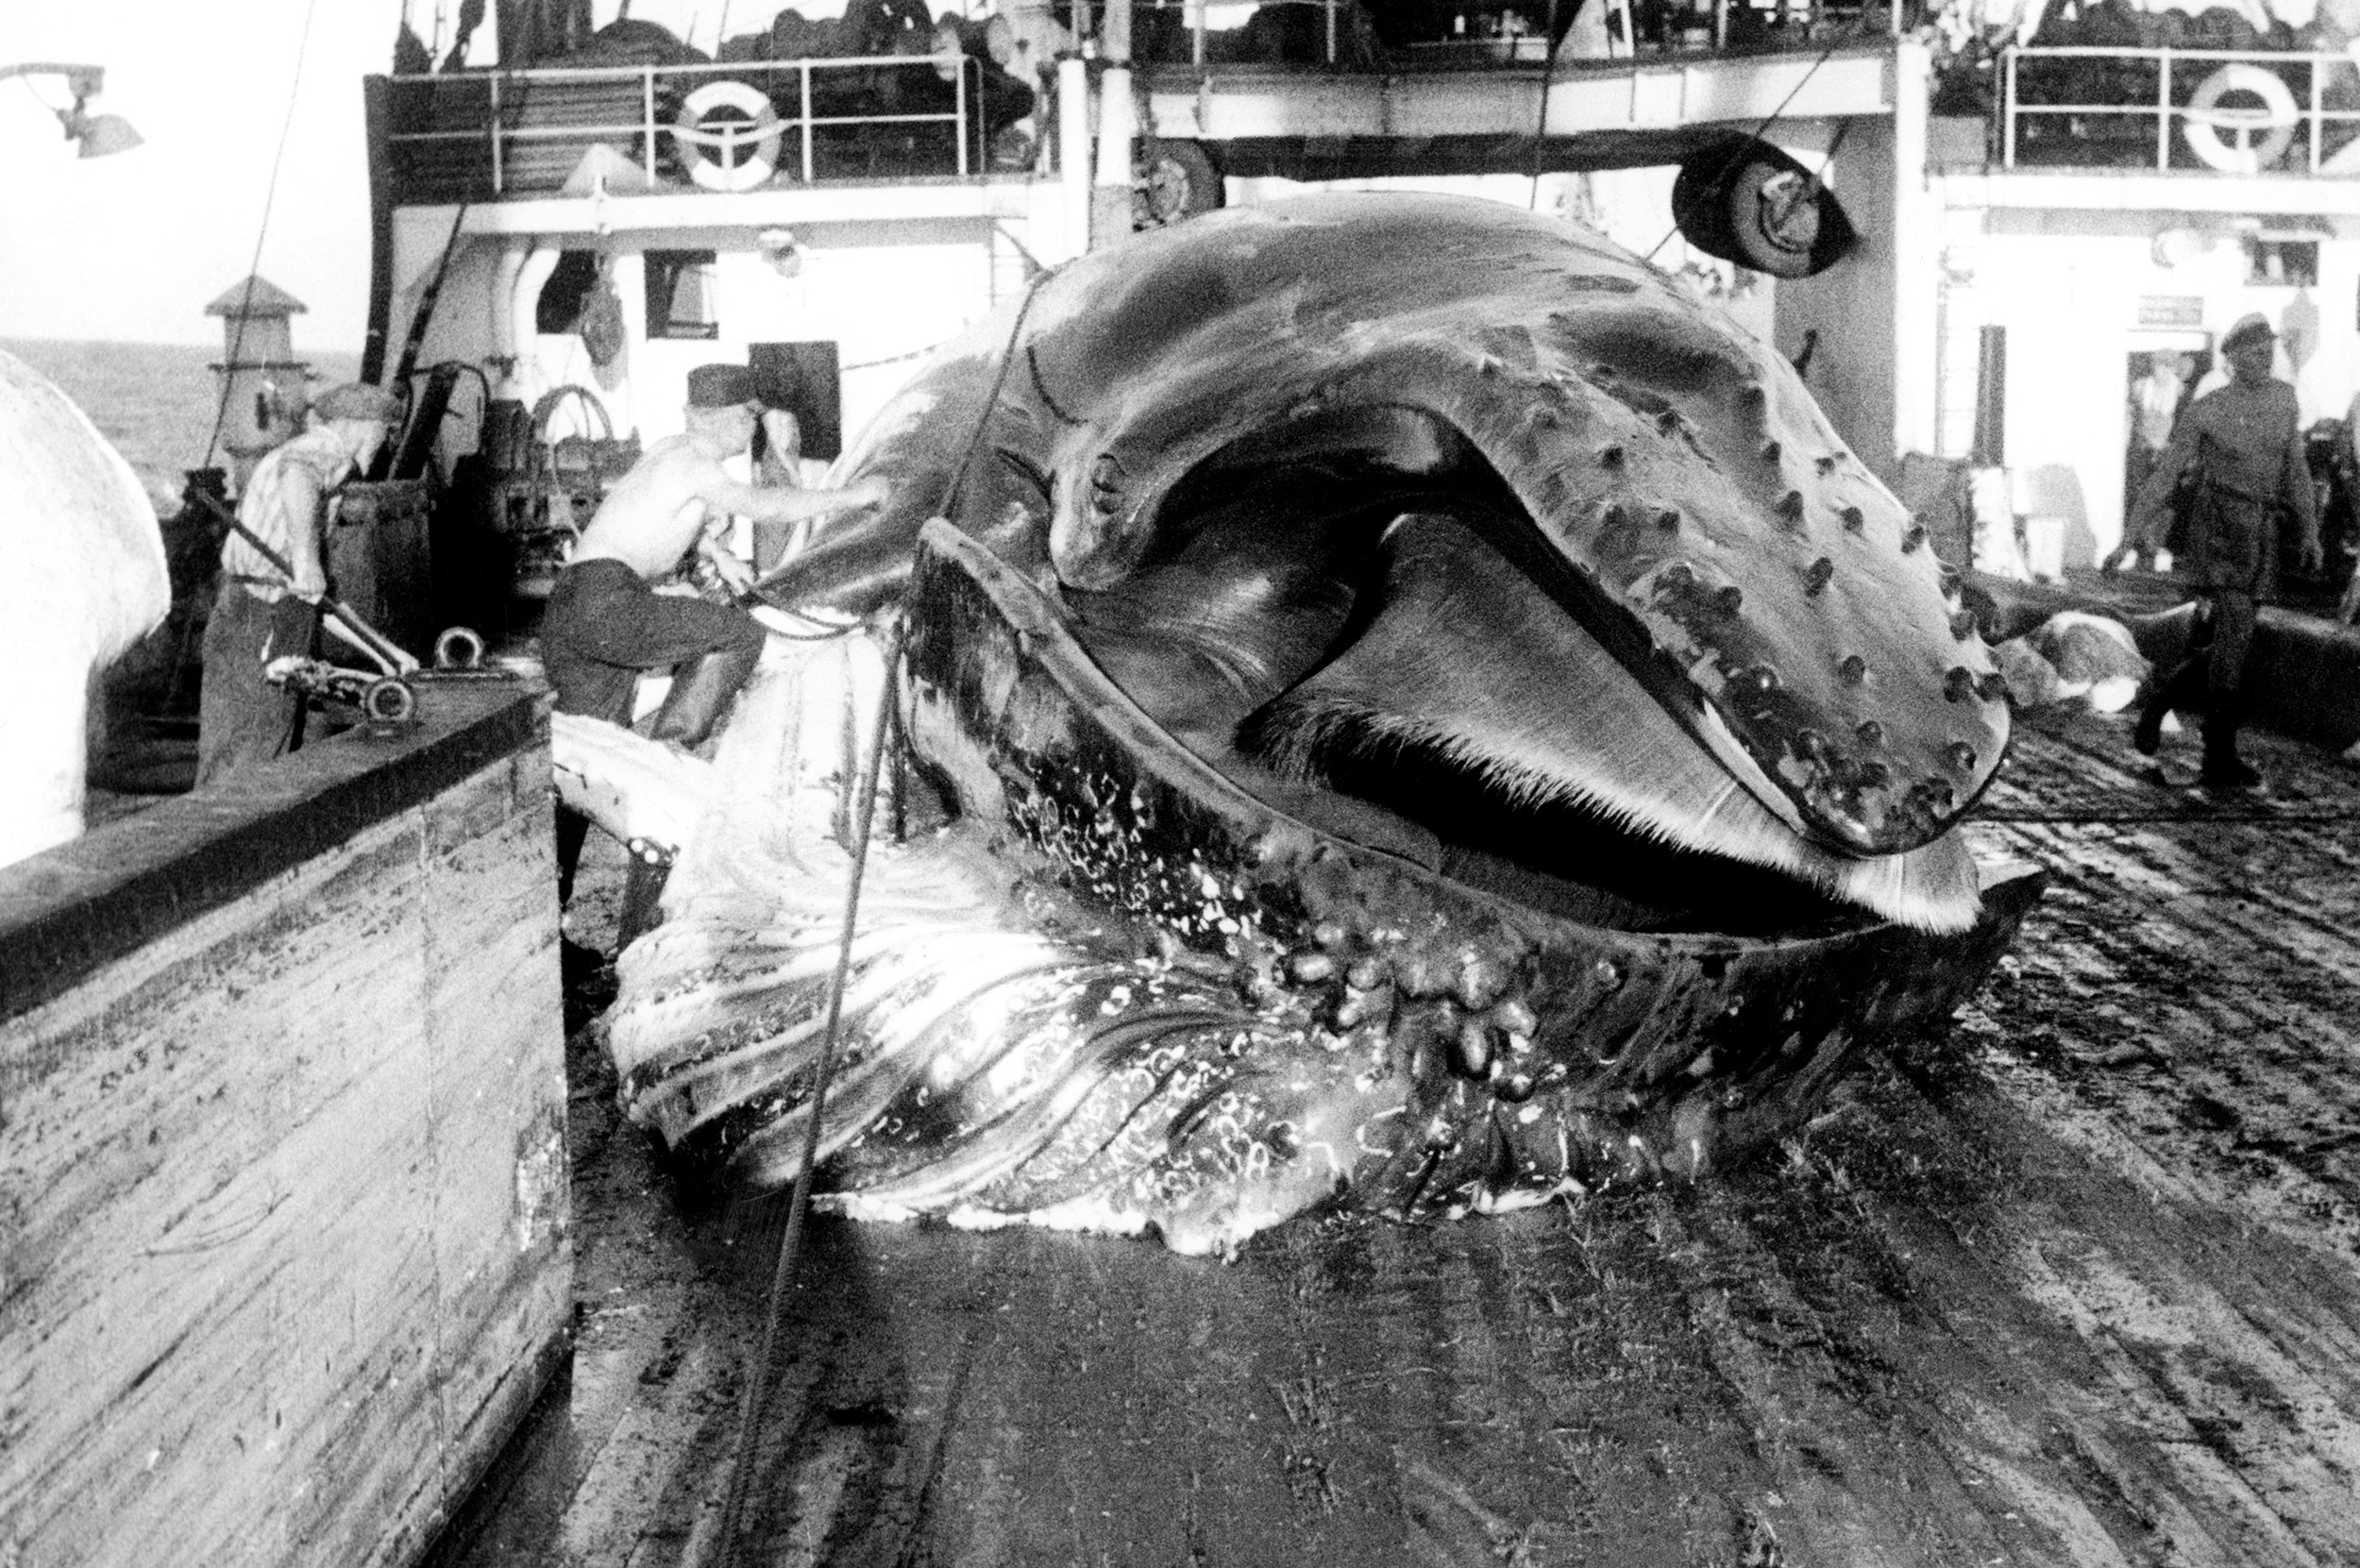 A whale captured on deck of a ship